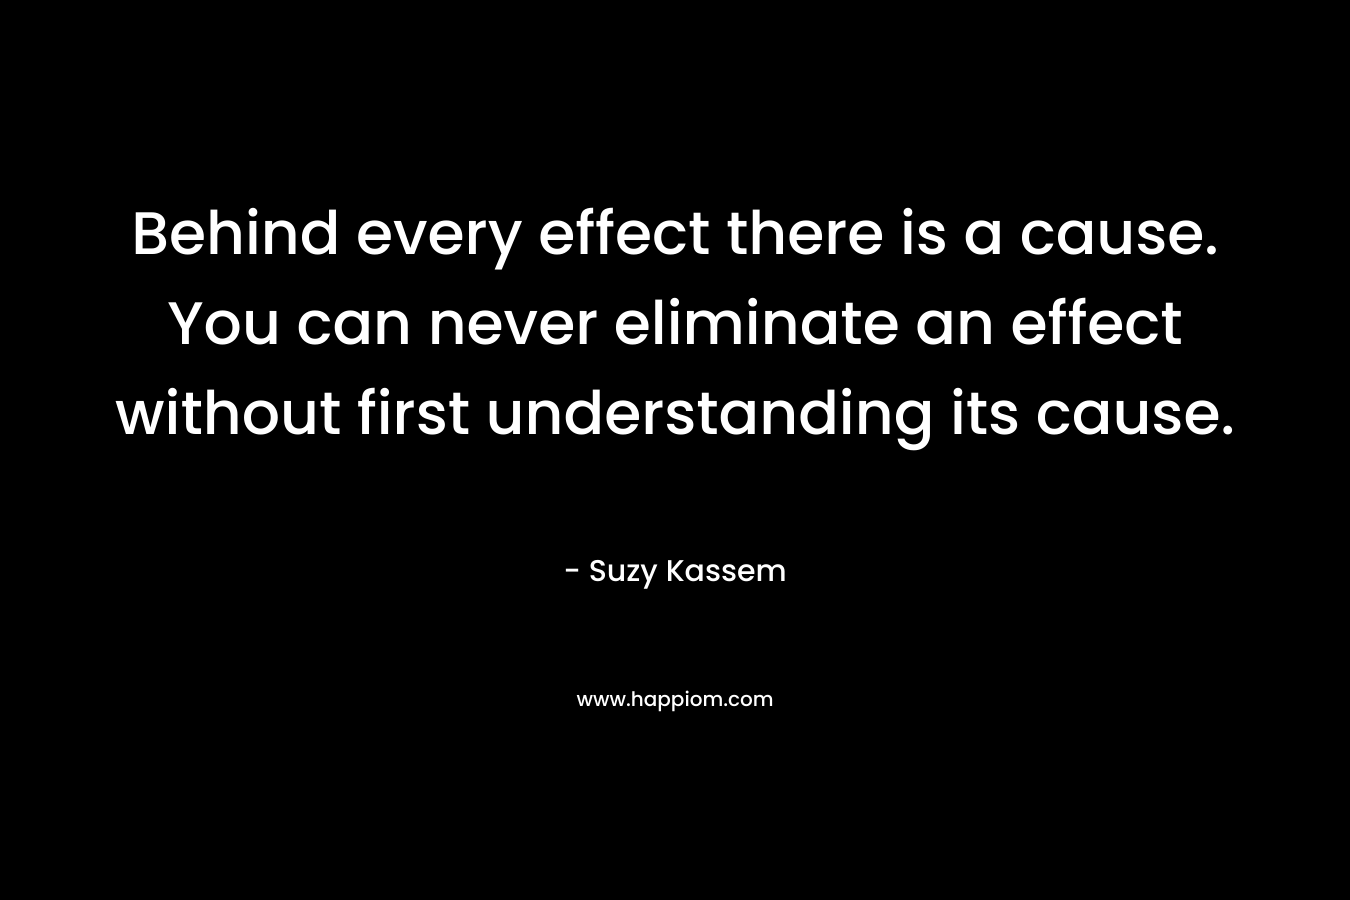 Behind every effect there is a cause. You can never eliminate an effect without first understanding its cause.